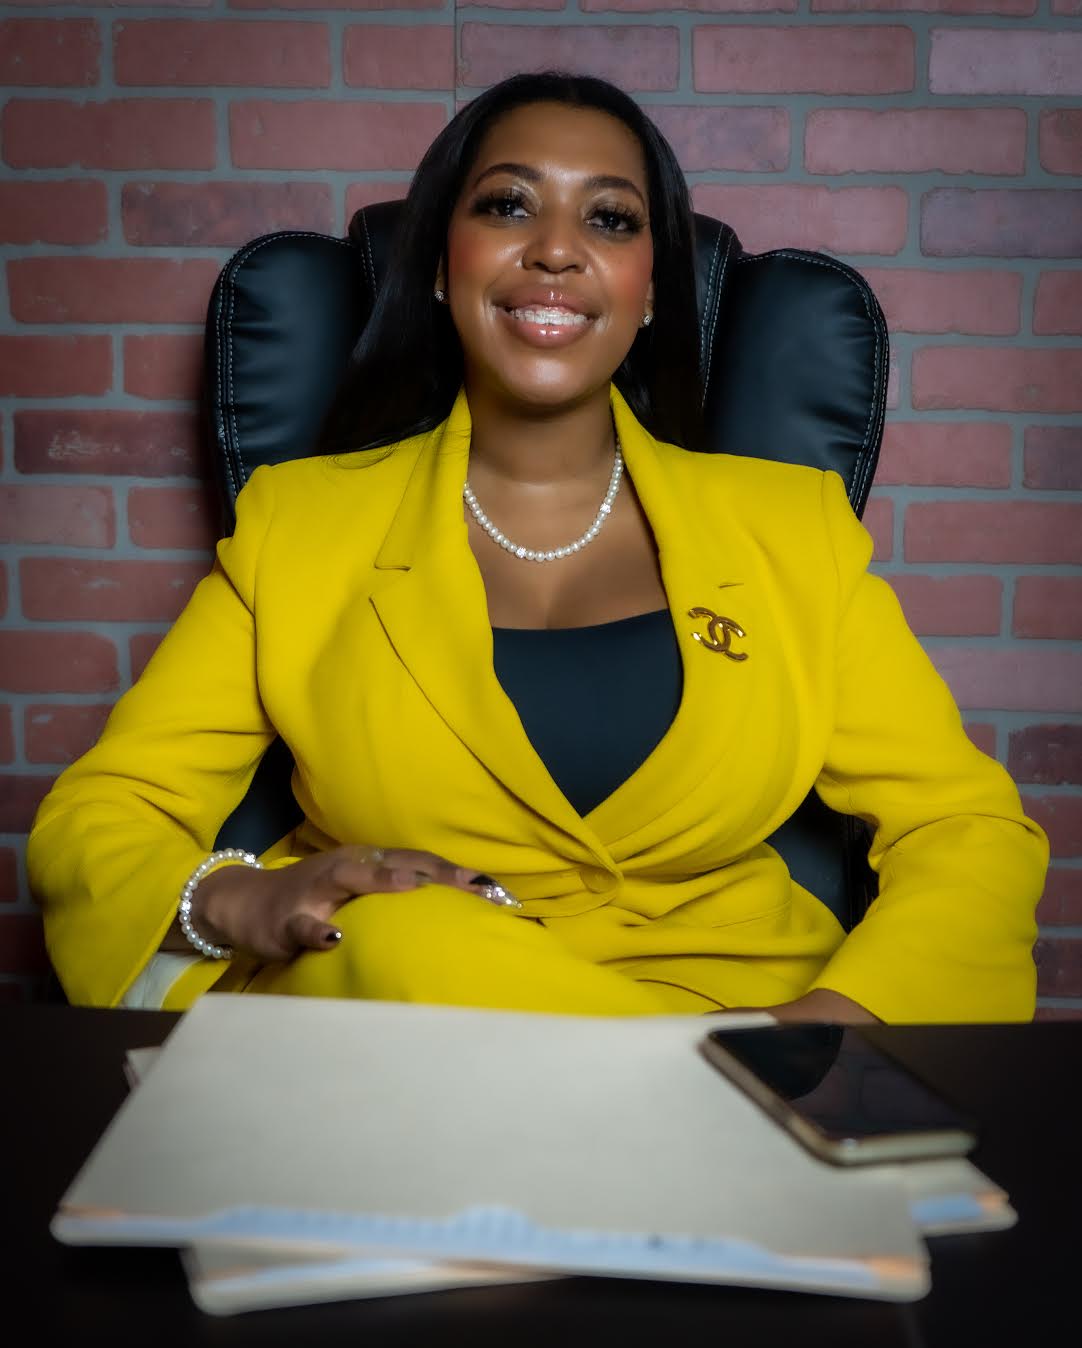 A Black woman wearing a bright yellow blazer smiles while sitting at a desk.